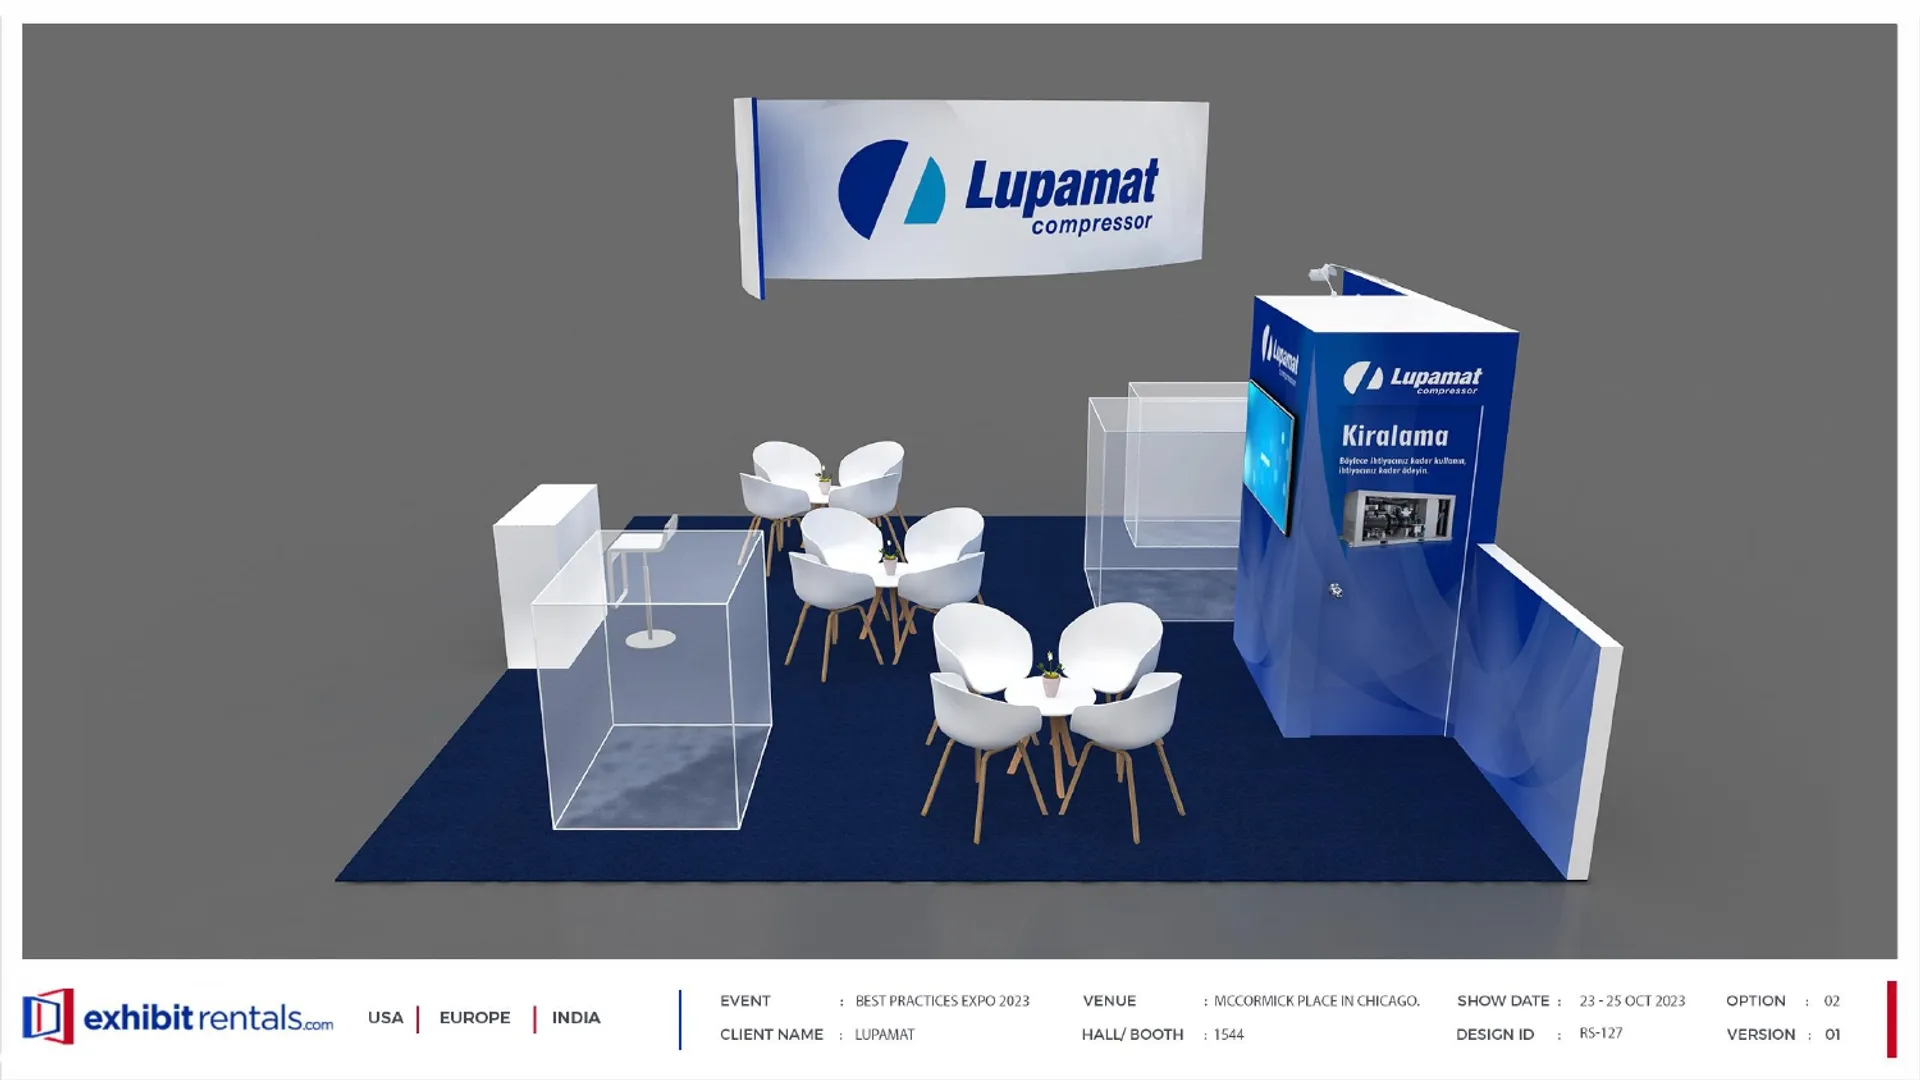 booth-design-projects/Exhibit-Rentals/2024-04-18-40x40-PENINSULA-Project-99/2.1_Lupamat_Best practices expo_ER design proposal-19_page-0001-zi40v5.jpg